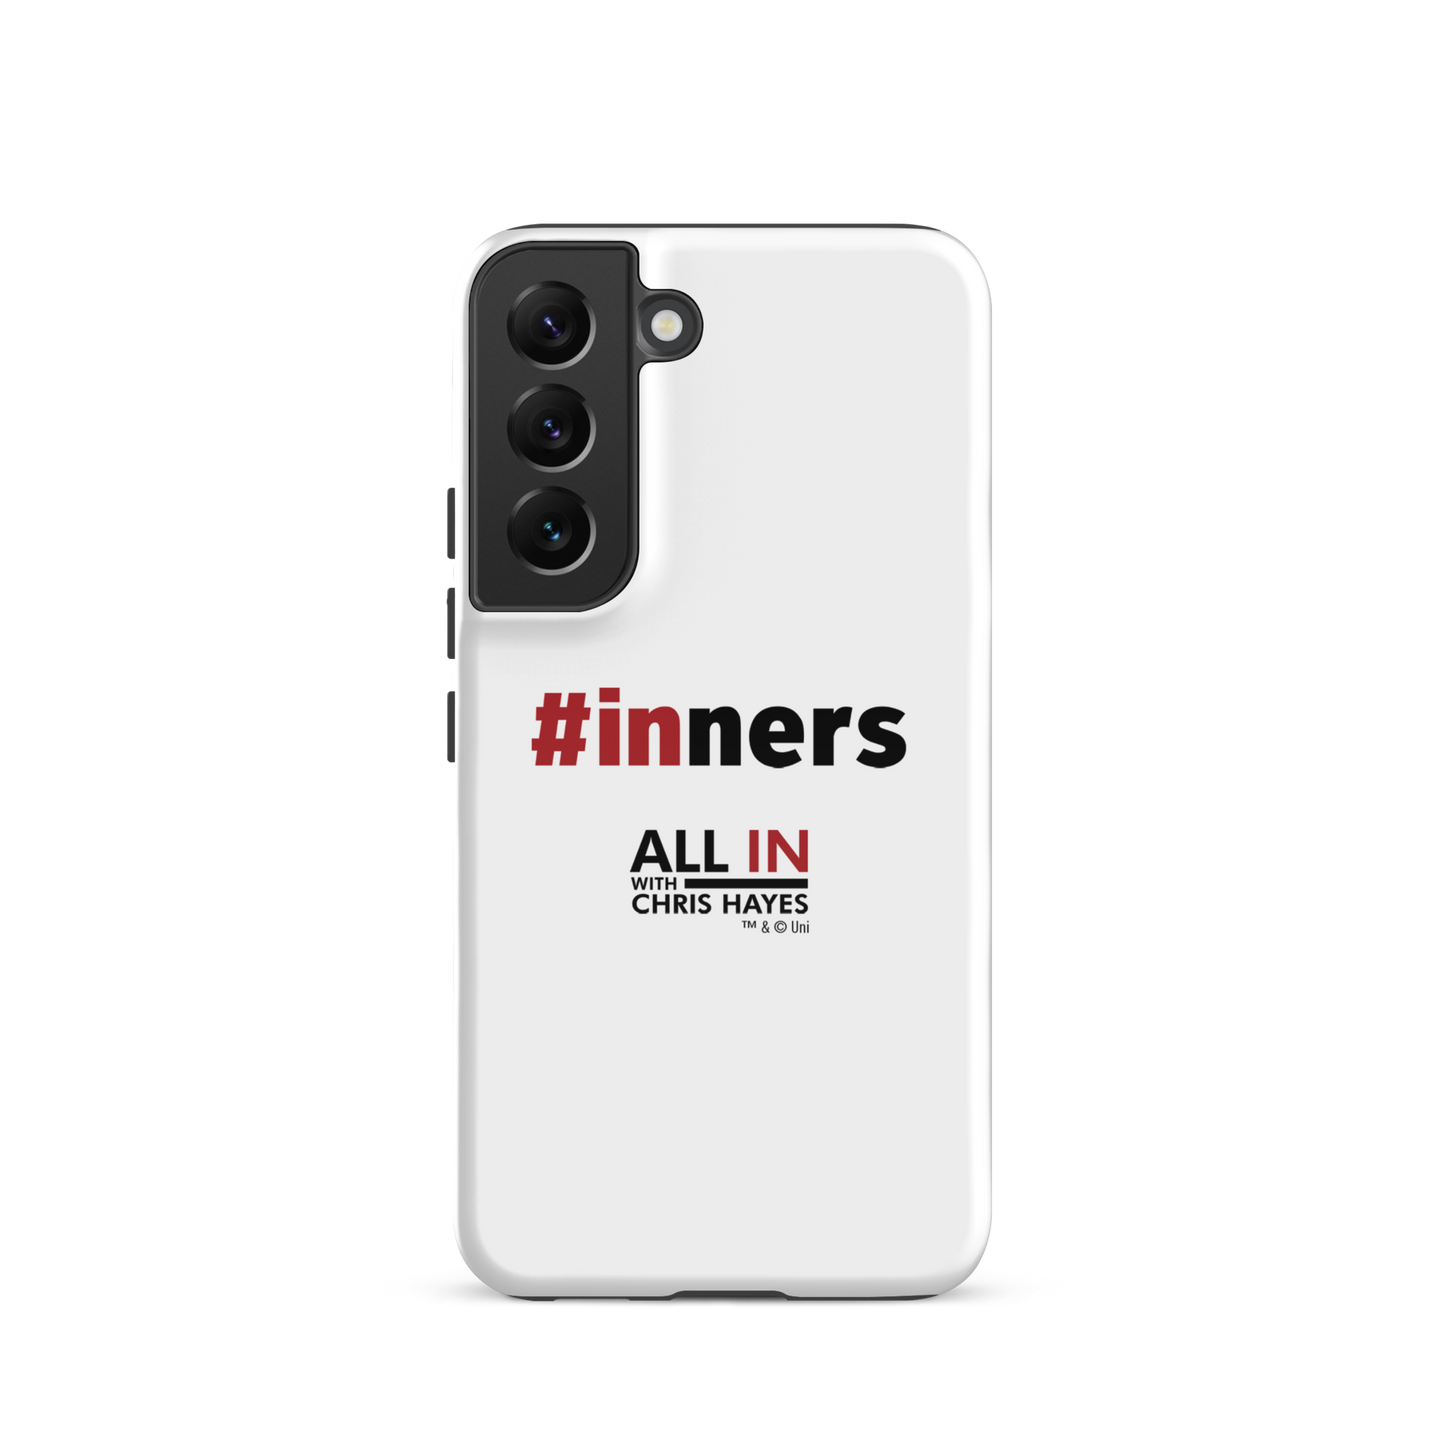 All In with Chris Hayes #INNERS Tough Phone Case - Samsung